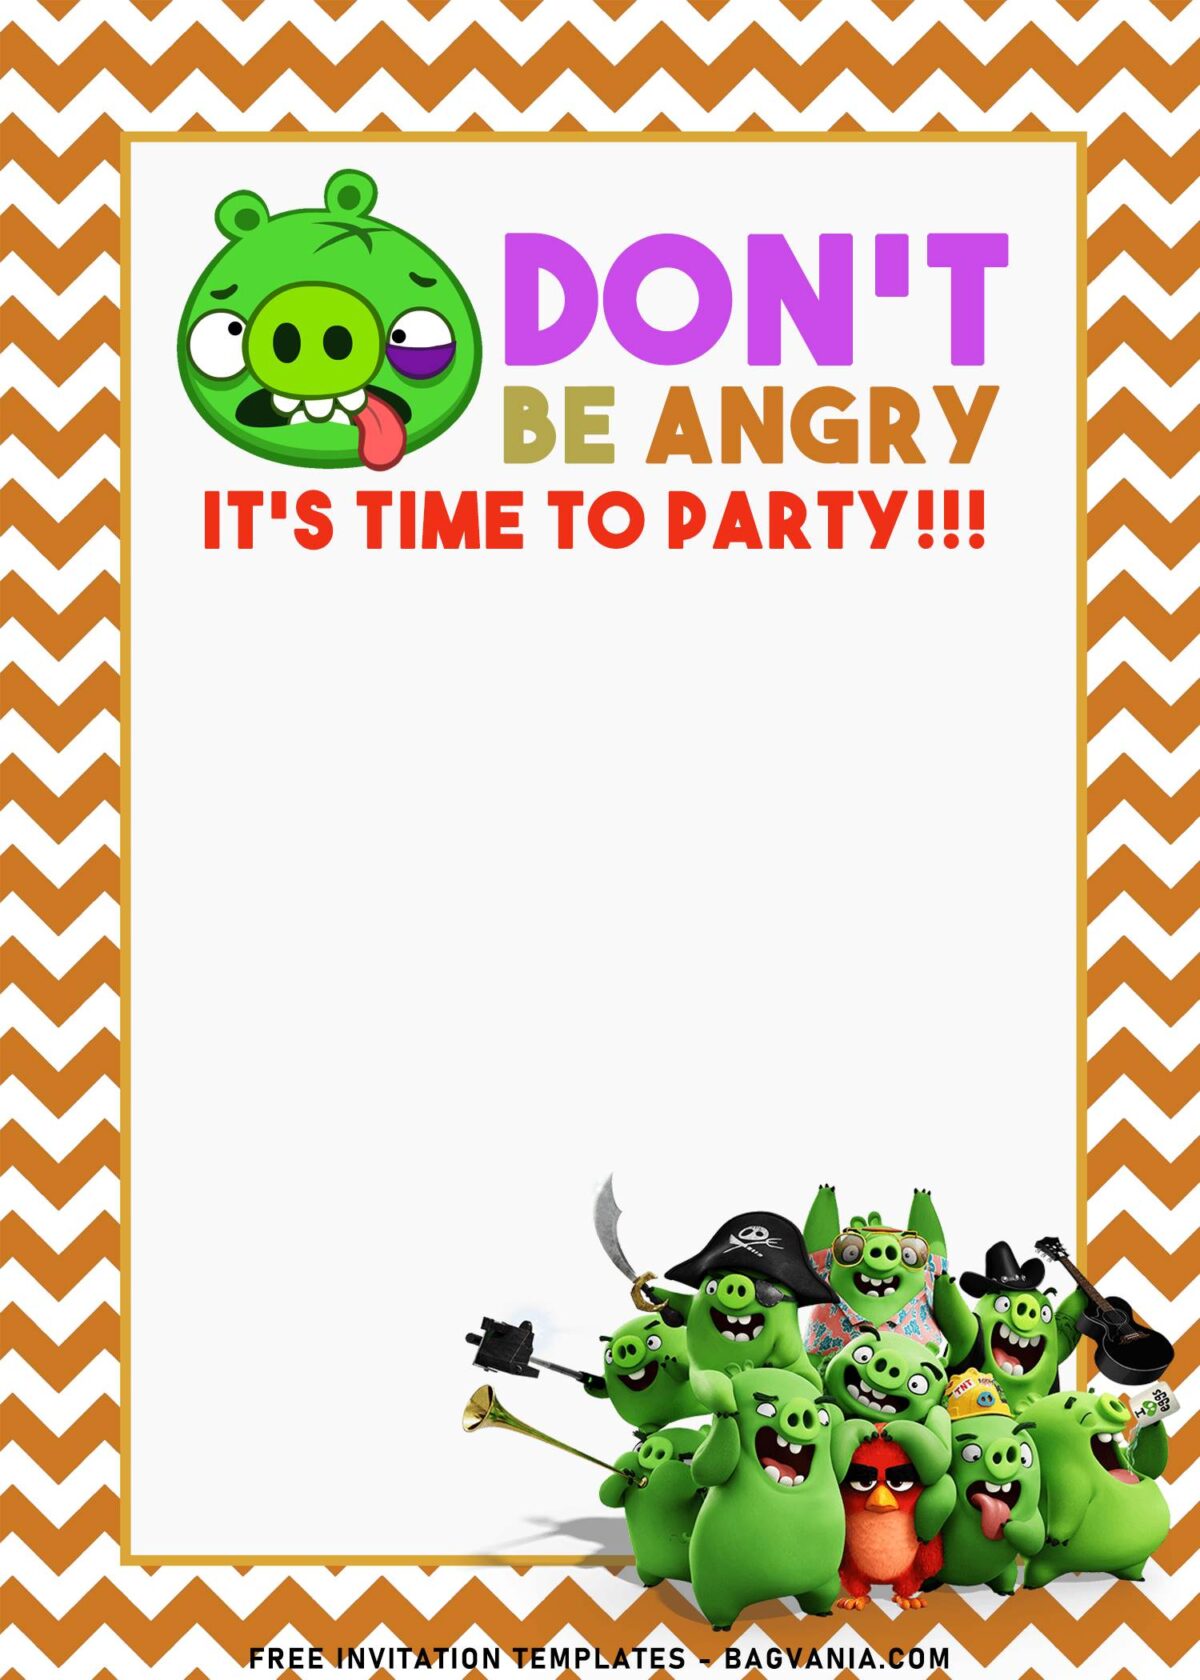 7+ Flashy Angry Birds And Bad Piggies Birthday Invitation Templates with colorful and catchy wording